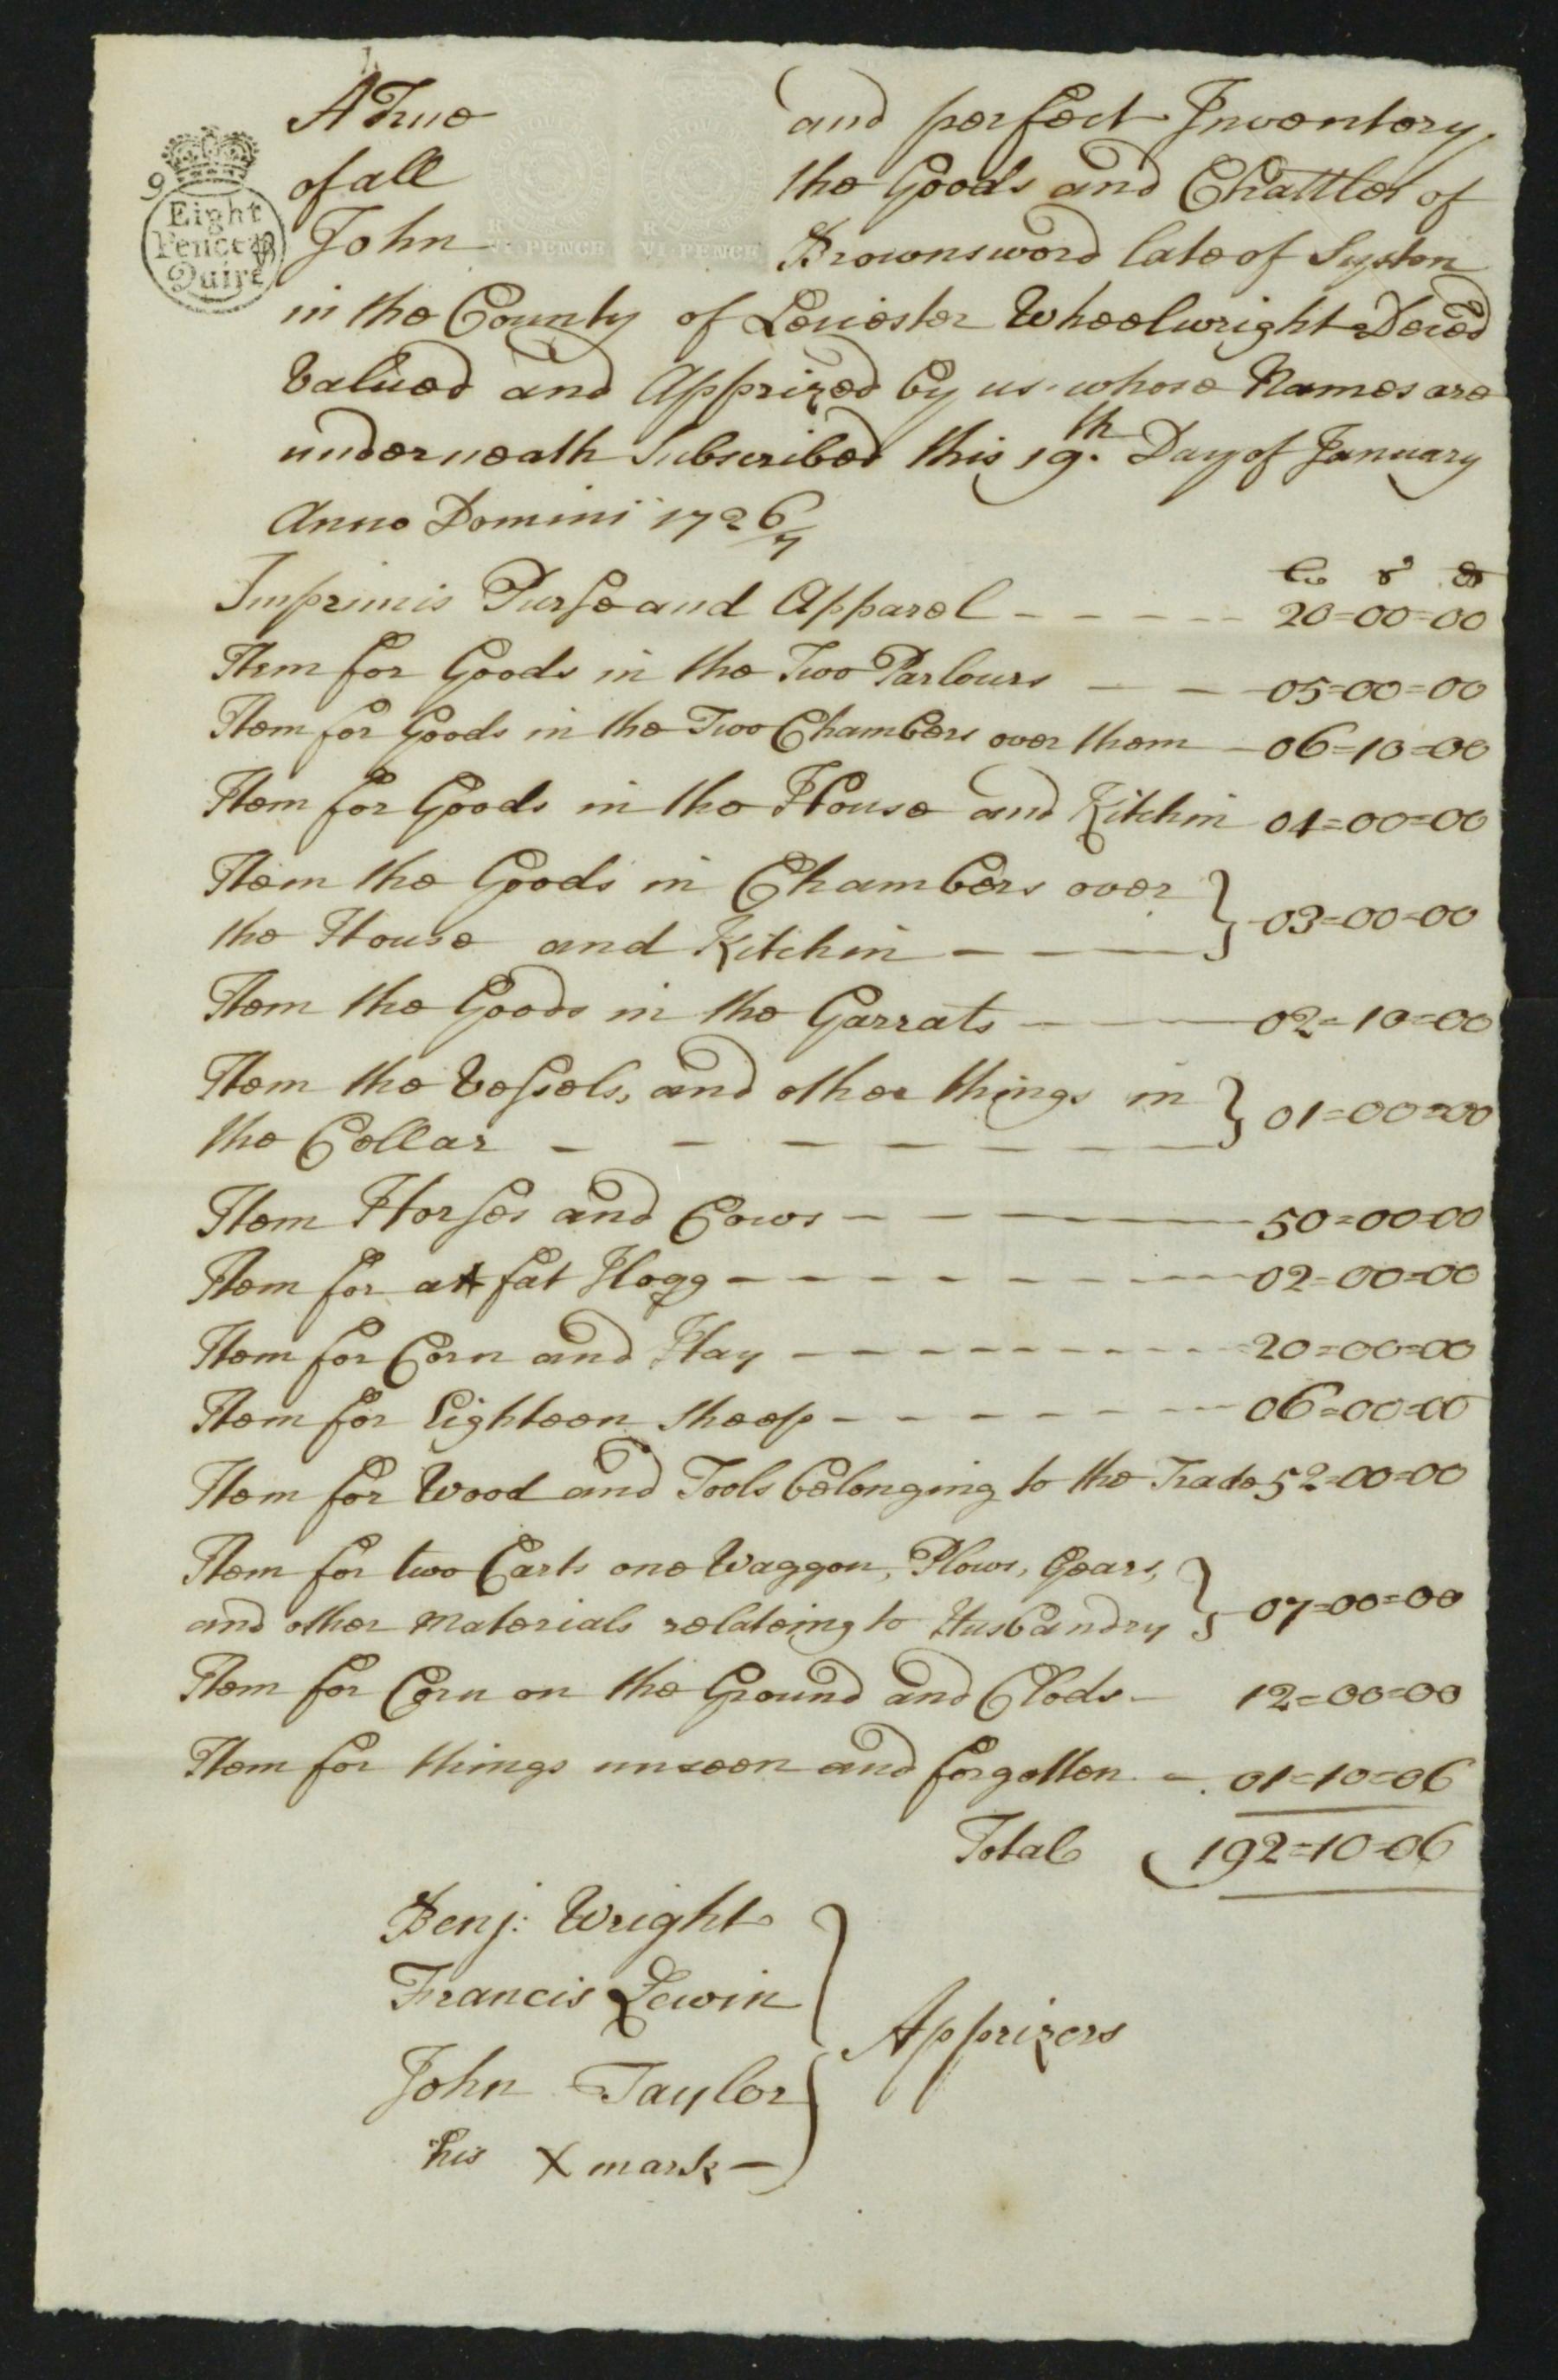 Inventory taken at John's death in 1726